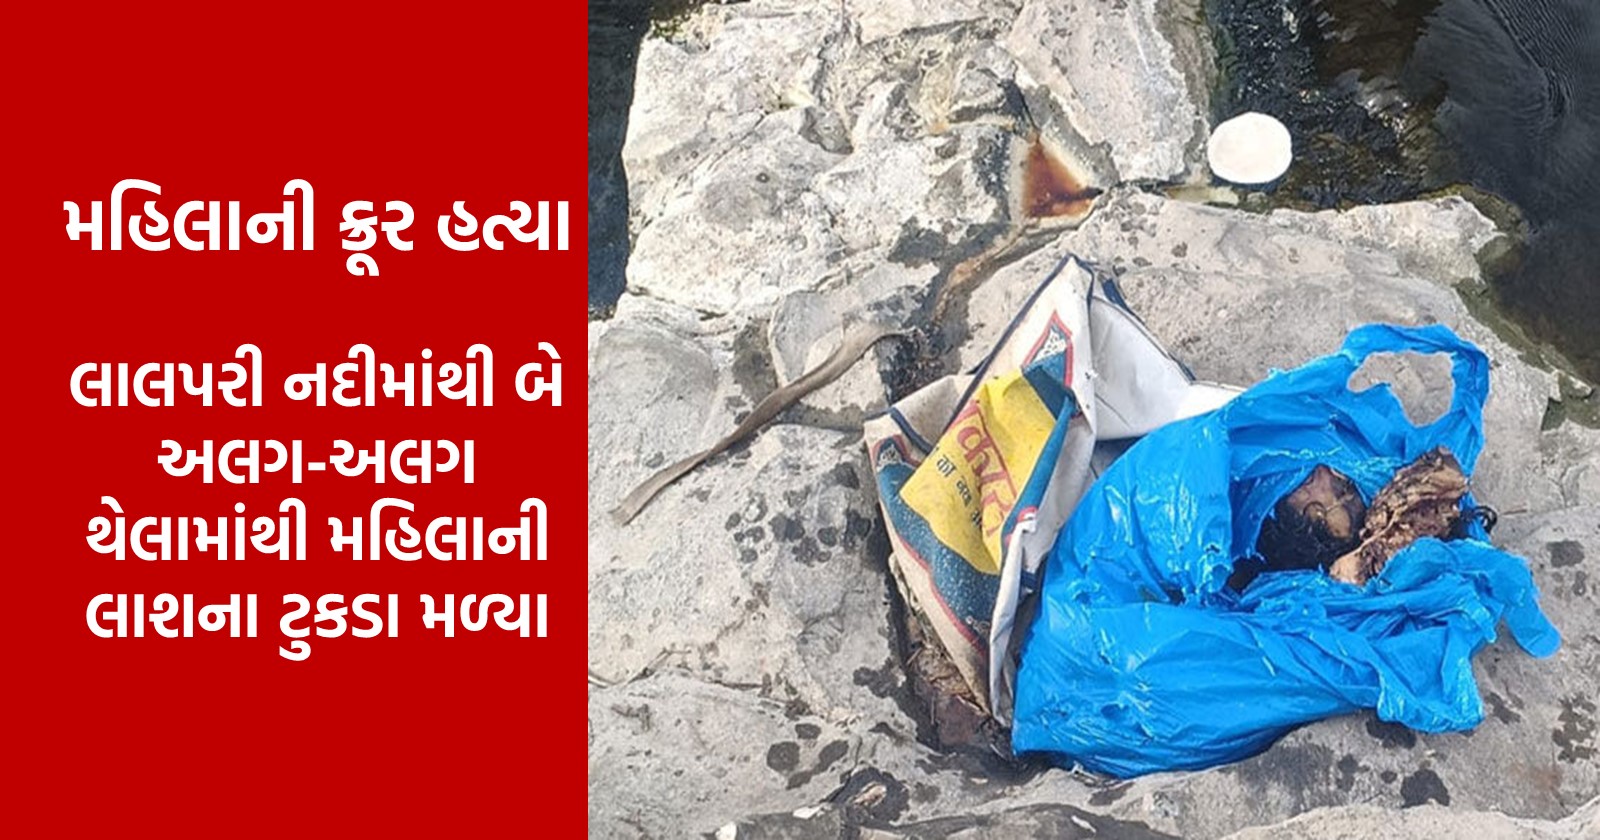 Brutal murder of woman – A woman's dismembered body found in Rajkot